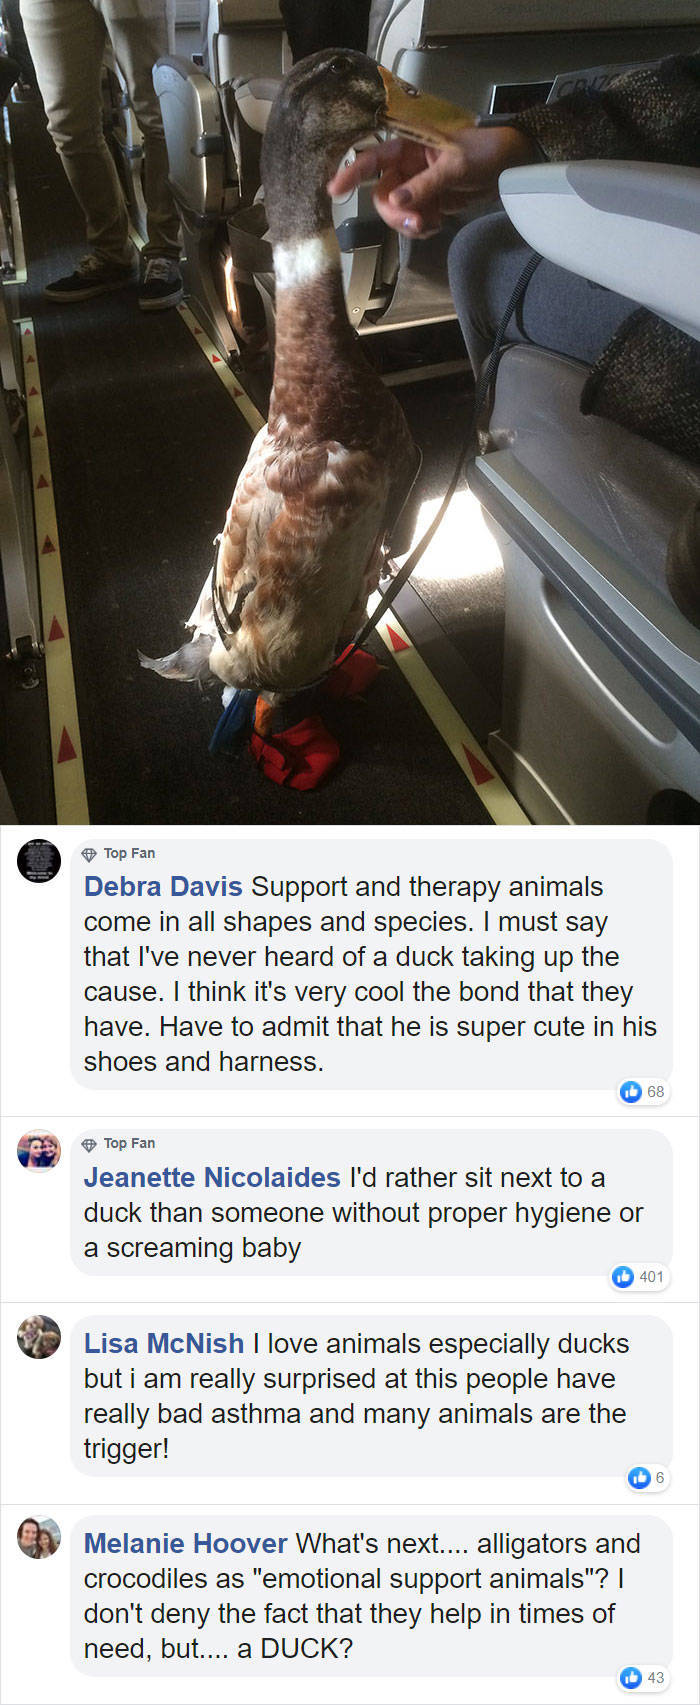 Do These People Go Too Far With Their Emotional Support Pets?